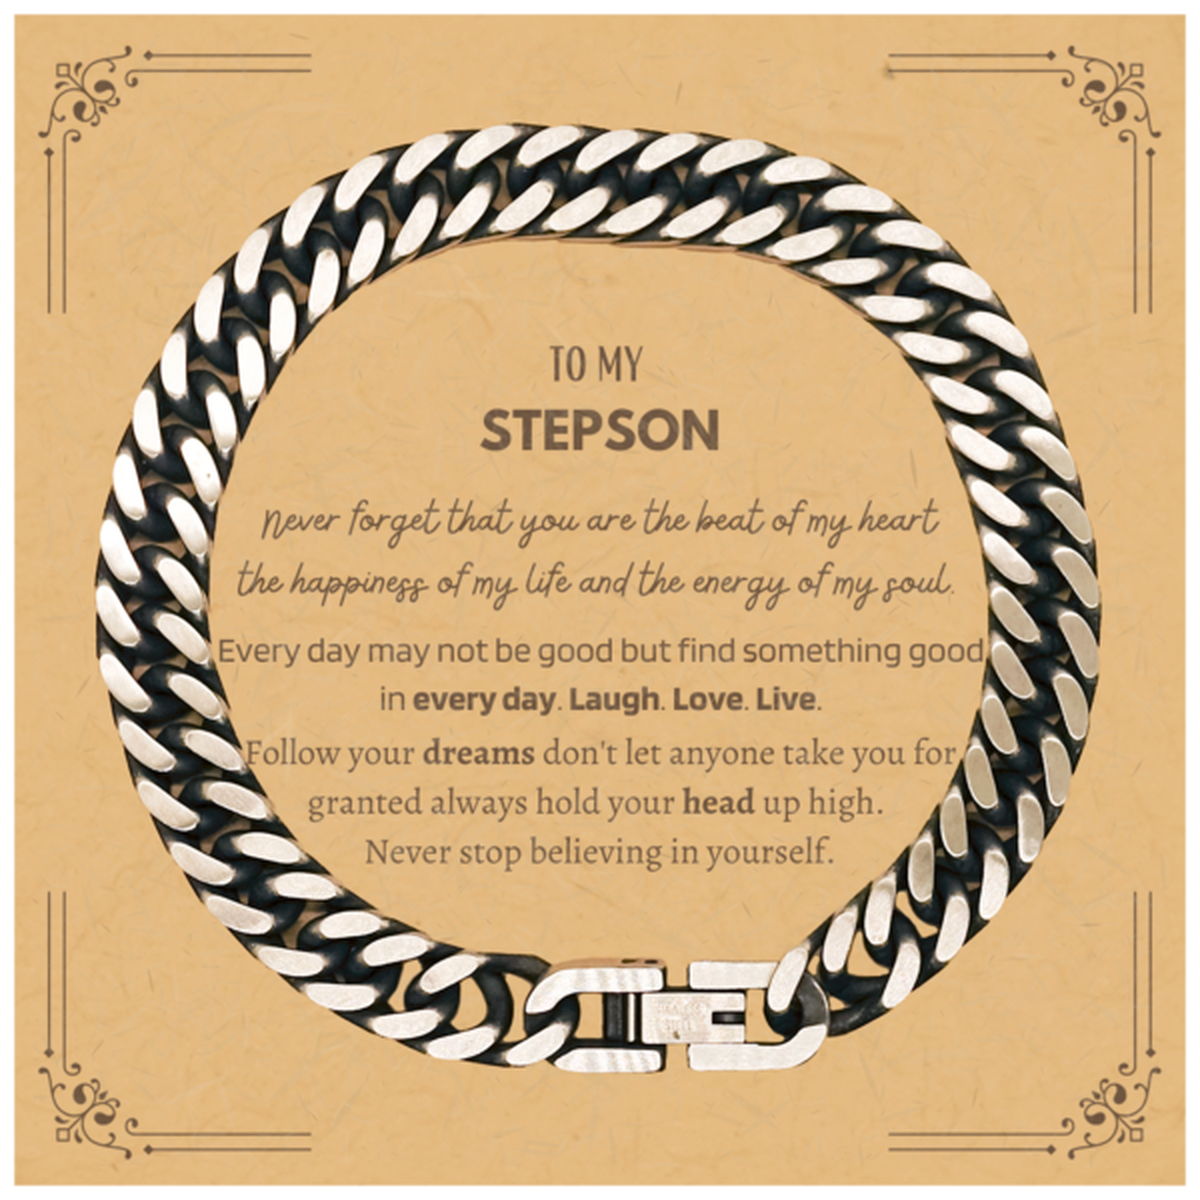 To My Stepson Message Card Gifts, Christmas Stepson Cuban Link Chain Bracelet Present, Birthday Unique Motivational For Stepson, To My Stepson Never forget that you are the beat of my heart the happiness of my life and the energy of my soul